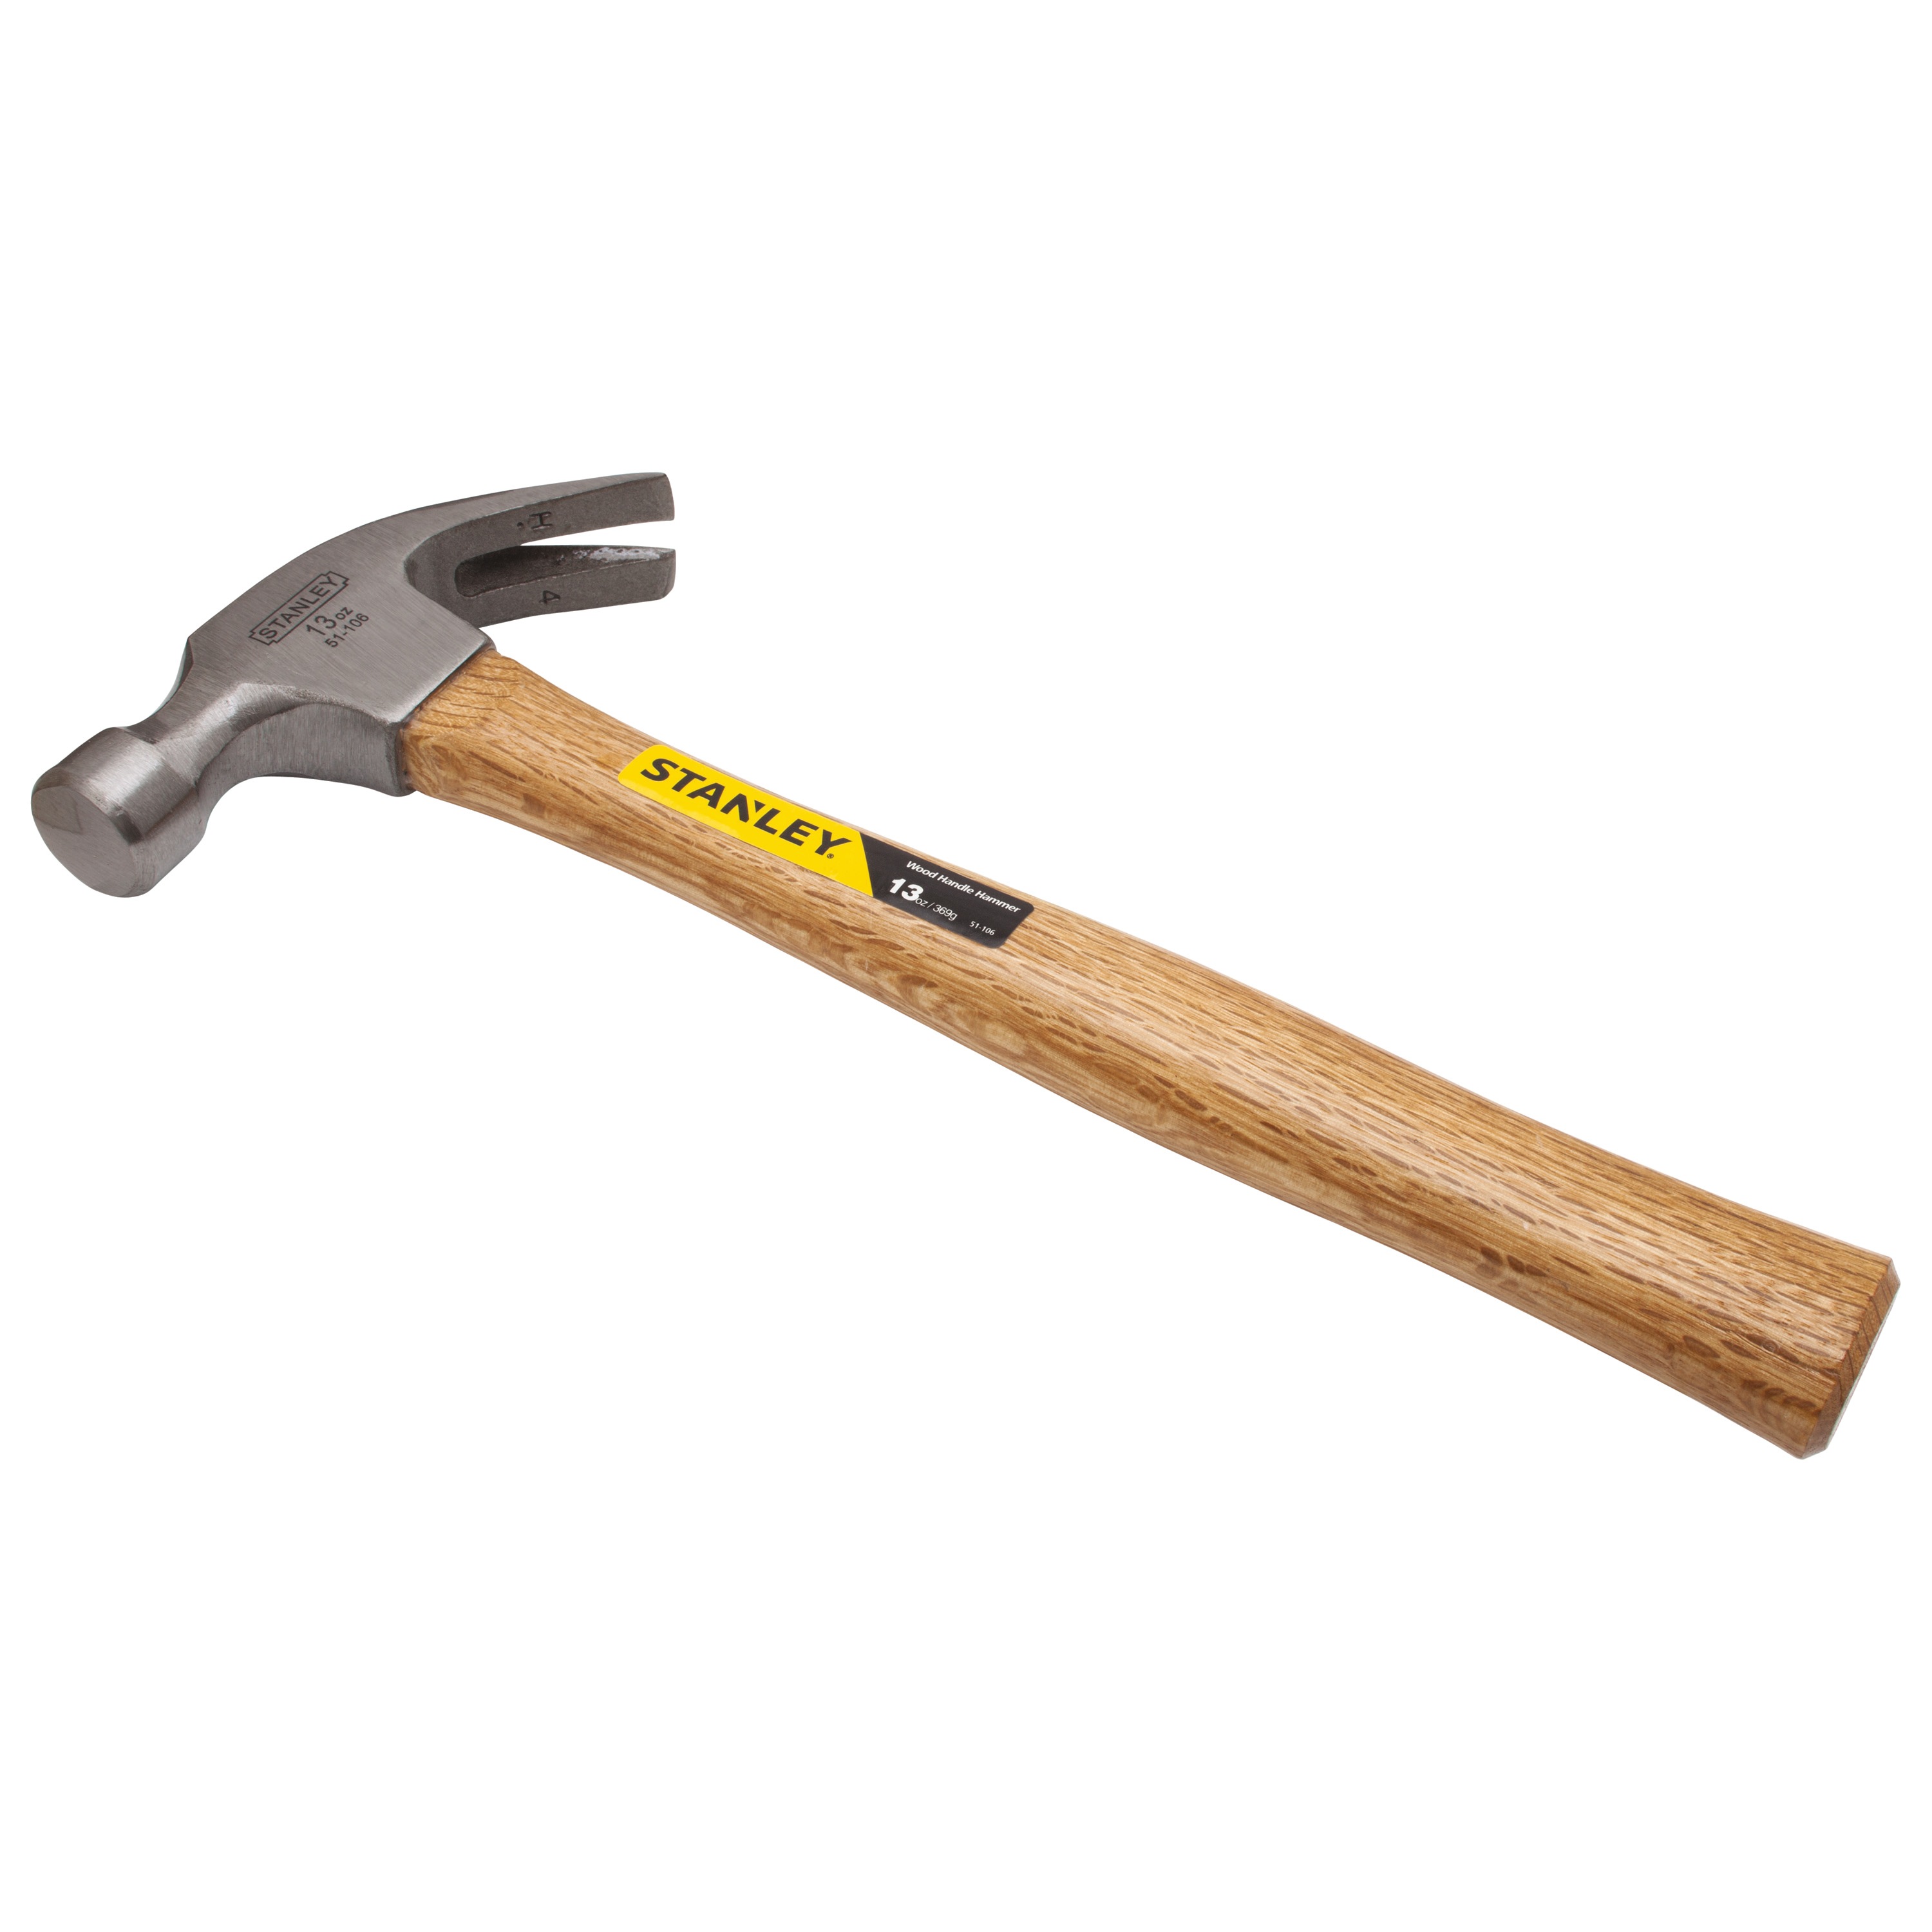 Stanley Tools - 13 oz Curved Claw Wood Handle Hammer - 51-106